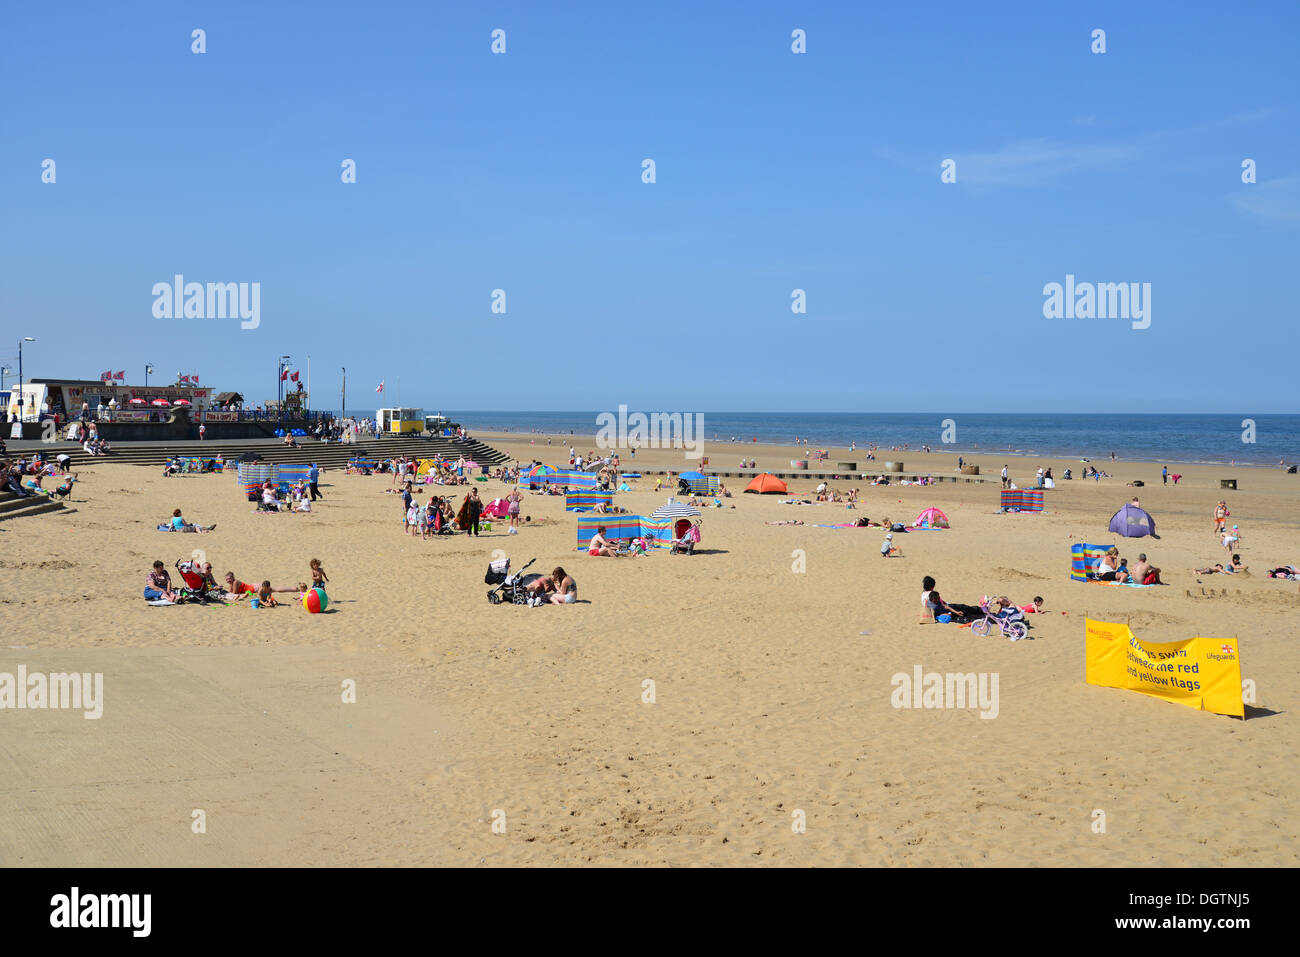 Mablethorpe Beach, Mablethorpe, Lincolnshire, England, Regno Unito Foto Stock